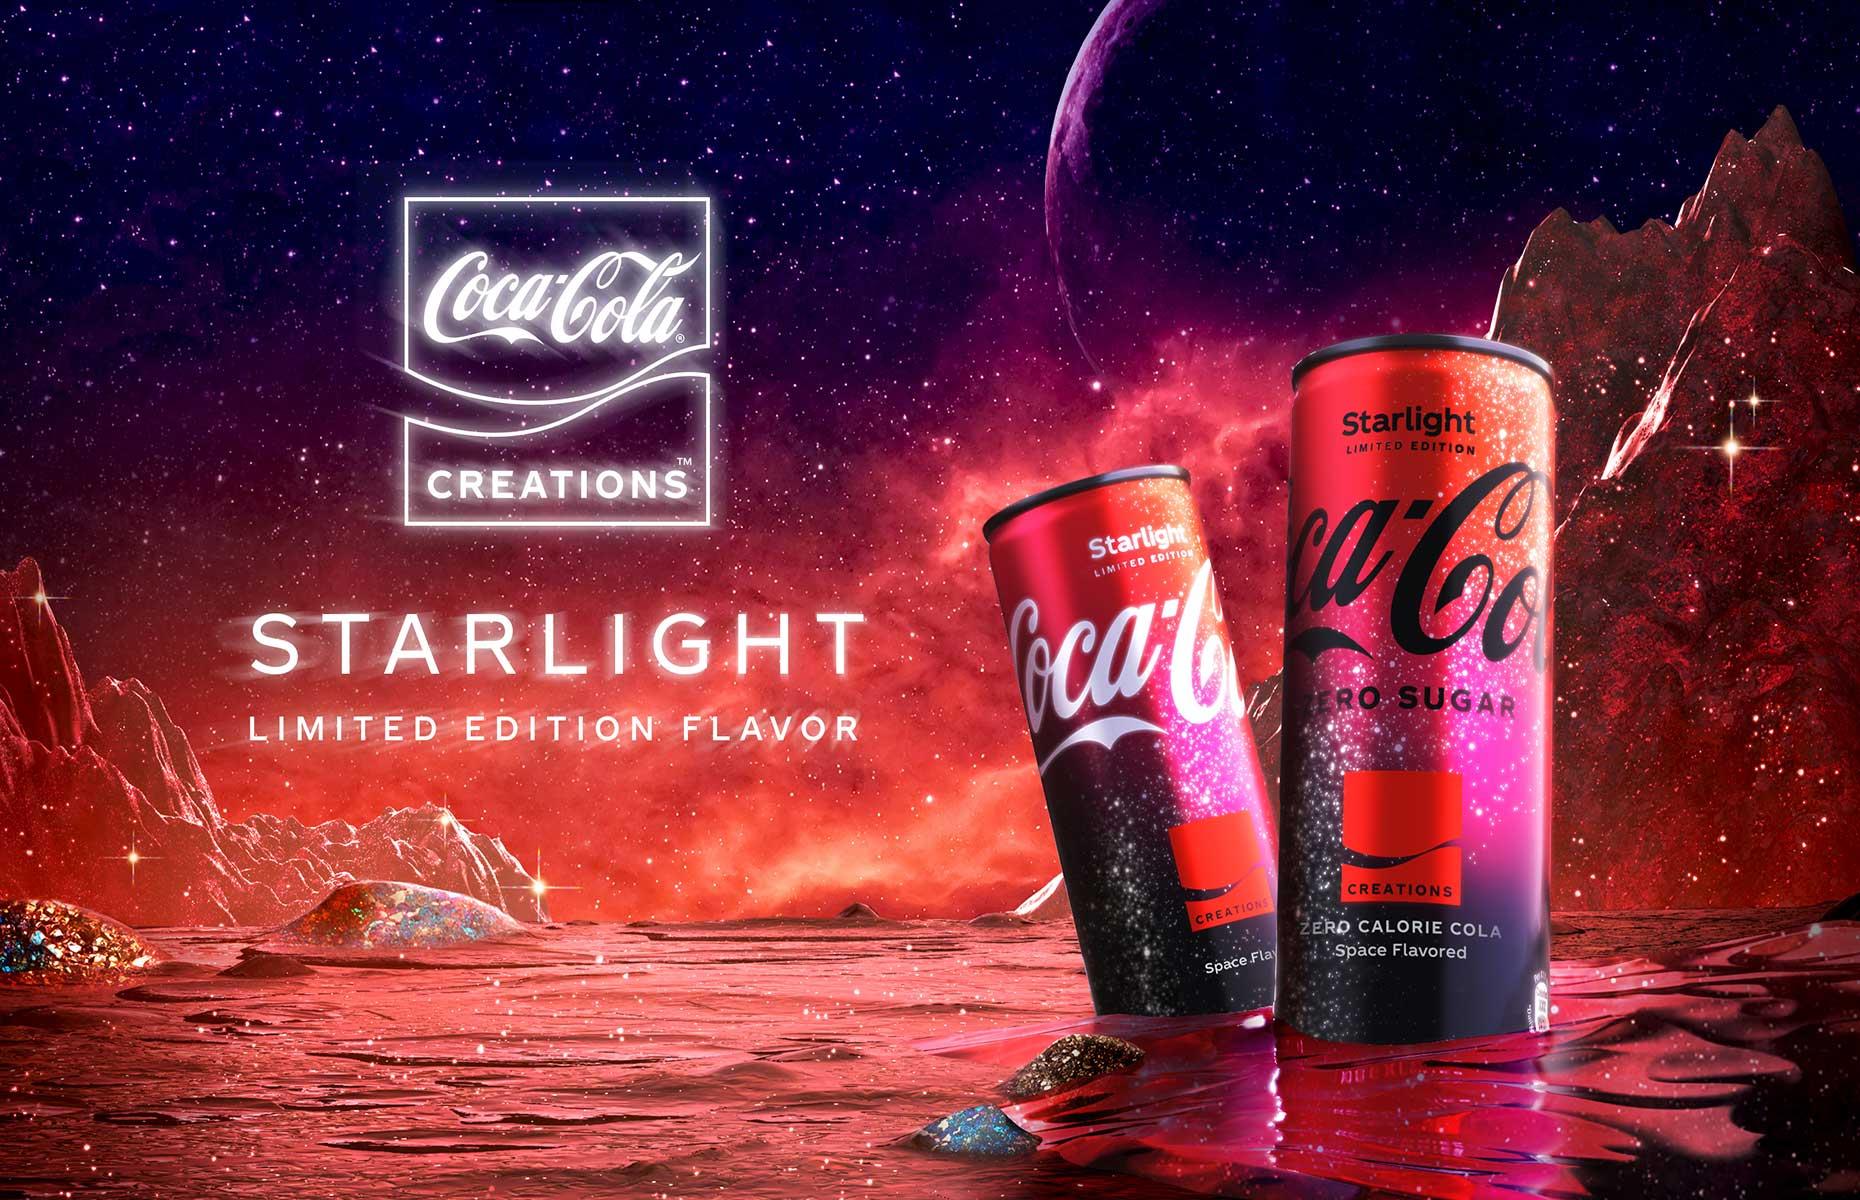 <p>Having conquered the world, Coca-Cola has got its sights set on other galaxies next... sort of. The drinks company is launching space-inspired Coca-Cola Starlight which it says, "combines great Coca-Cola taste with a dash of the unexpected, including a reddish hue. Its taste includes additional notes reminiscent of stargazing around a campfire, as well as a cooling sensation that evokes the feeling of a cold journey to space." It'll be available for a limited time only across North America and in select countries globally.</p>  <p><strong><a href="https://www.lovefood.com/galleries/109187/sodas-america-adored-the-decade-you-were-born">Check out sodas America adored the decade you were born</a></strong></p>